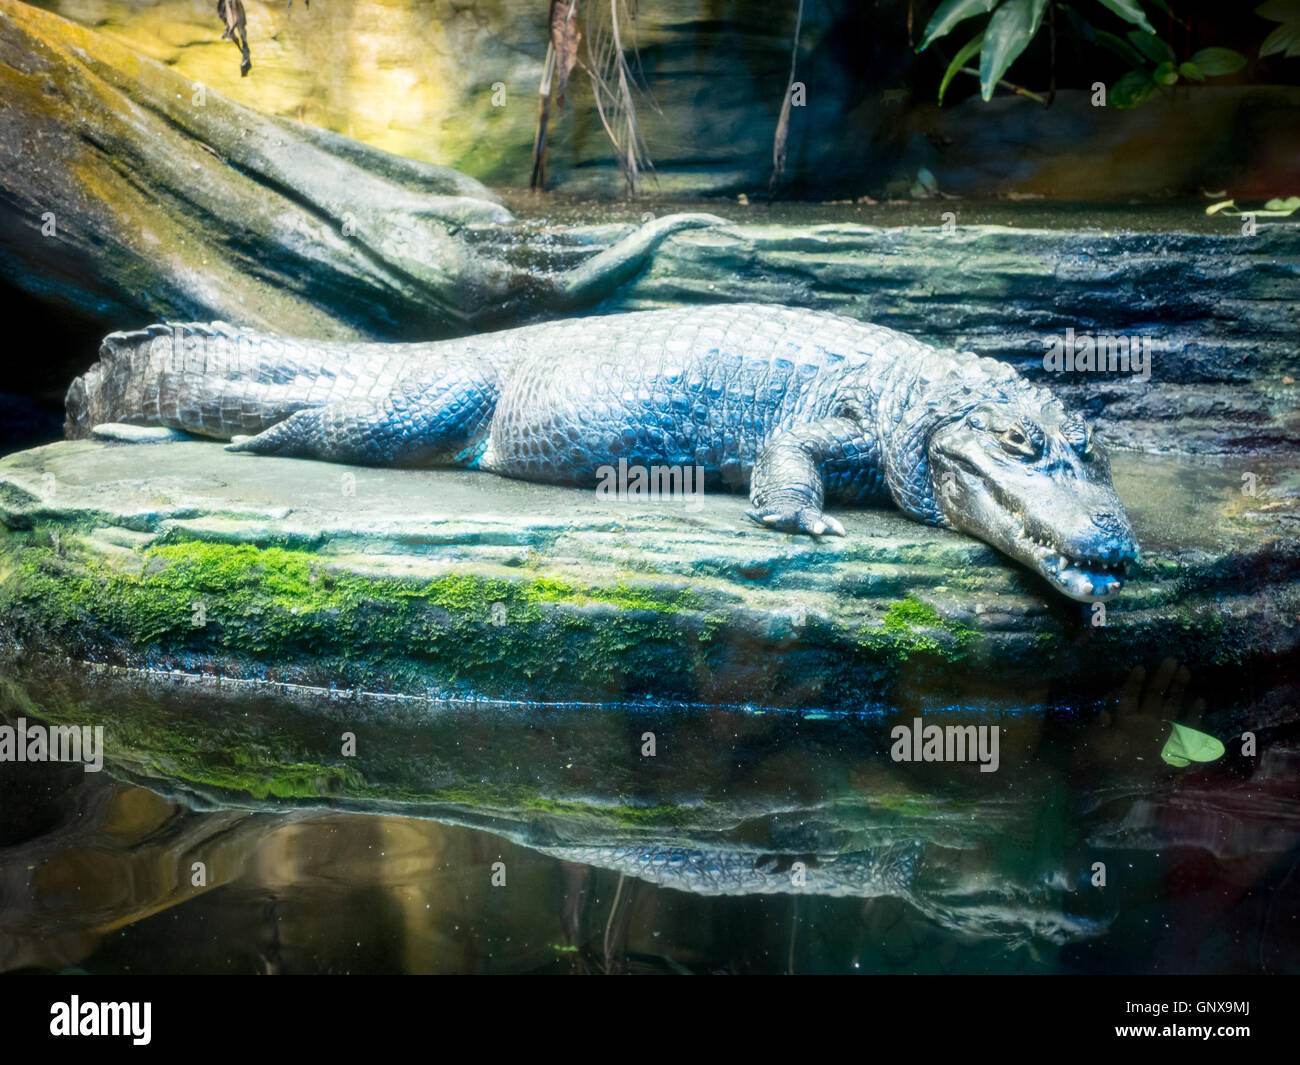 A scary-looking yacare caiman (Caiman yacare, jacaré) at the Vancouver Aquarium in Vancouver, British Columbia, Canada. Stock Photo